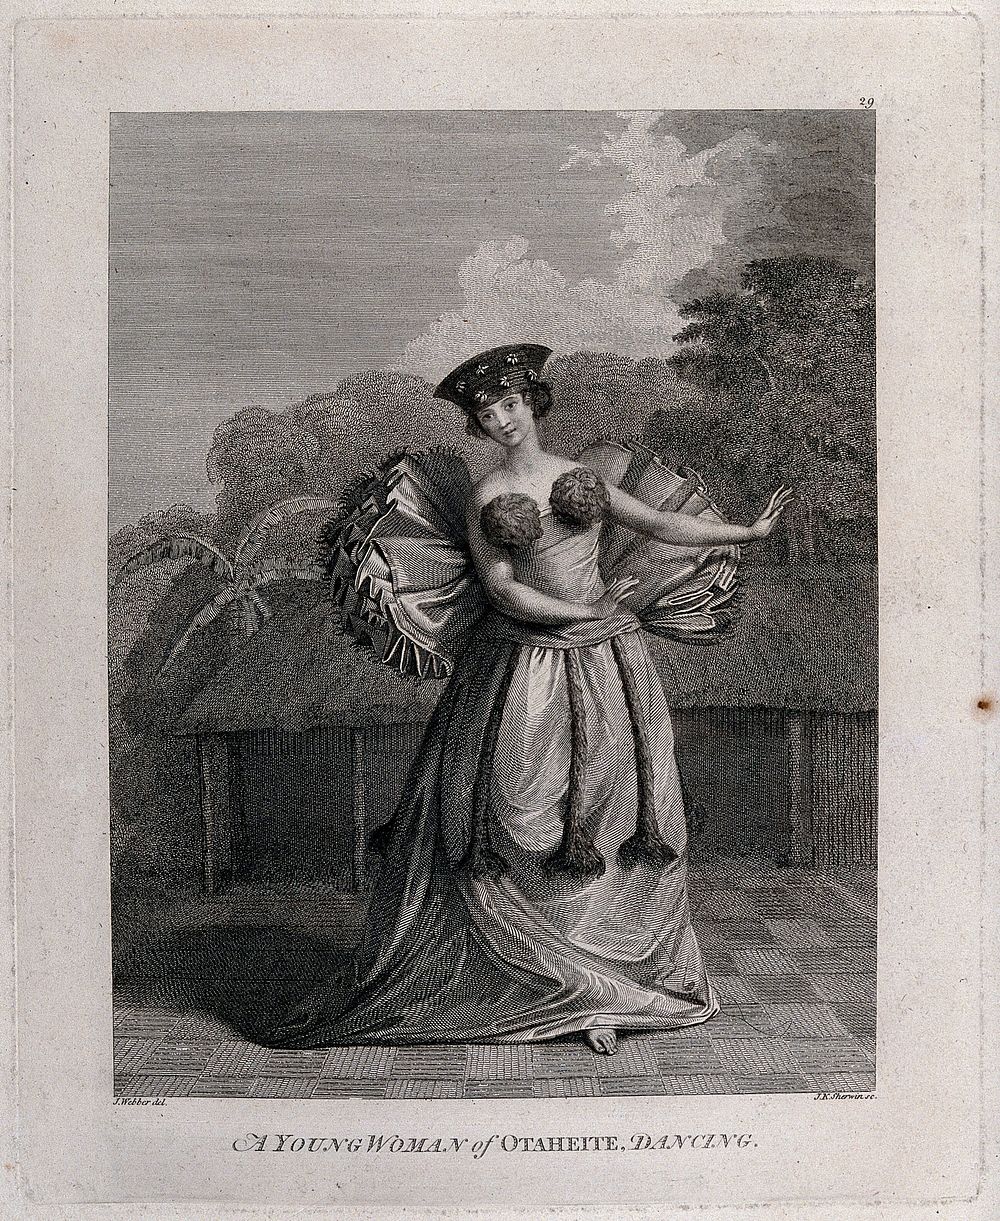 A young woman from Tahiti, dancing. Engraving by J.K. Sherwin, 1784, after J. Webber.